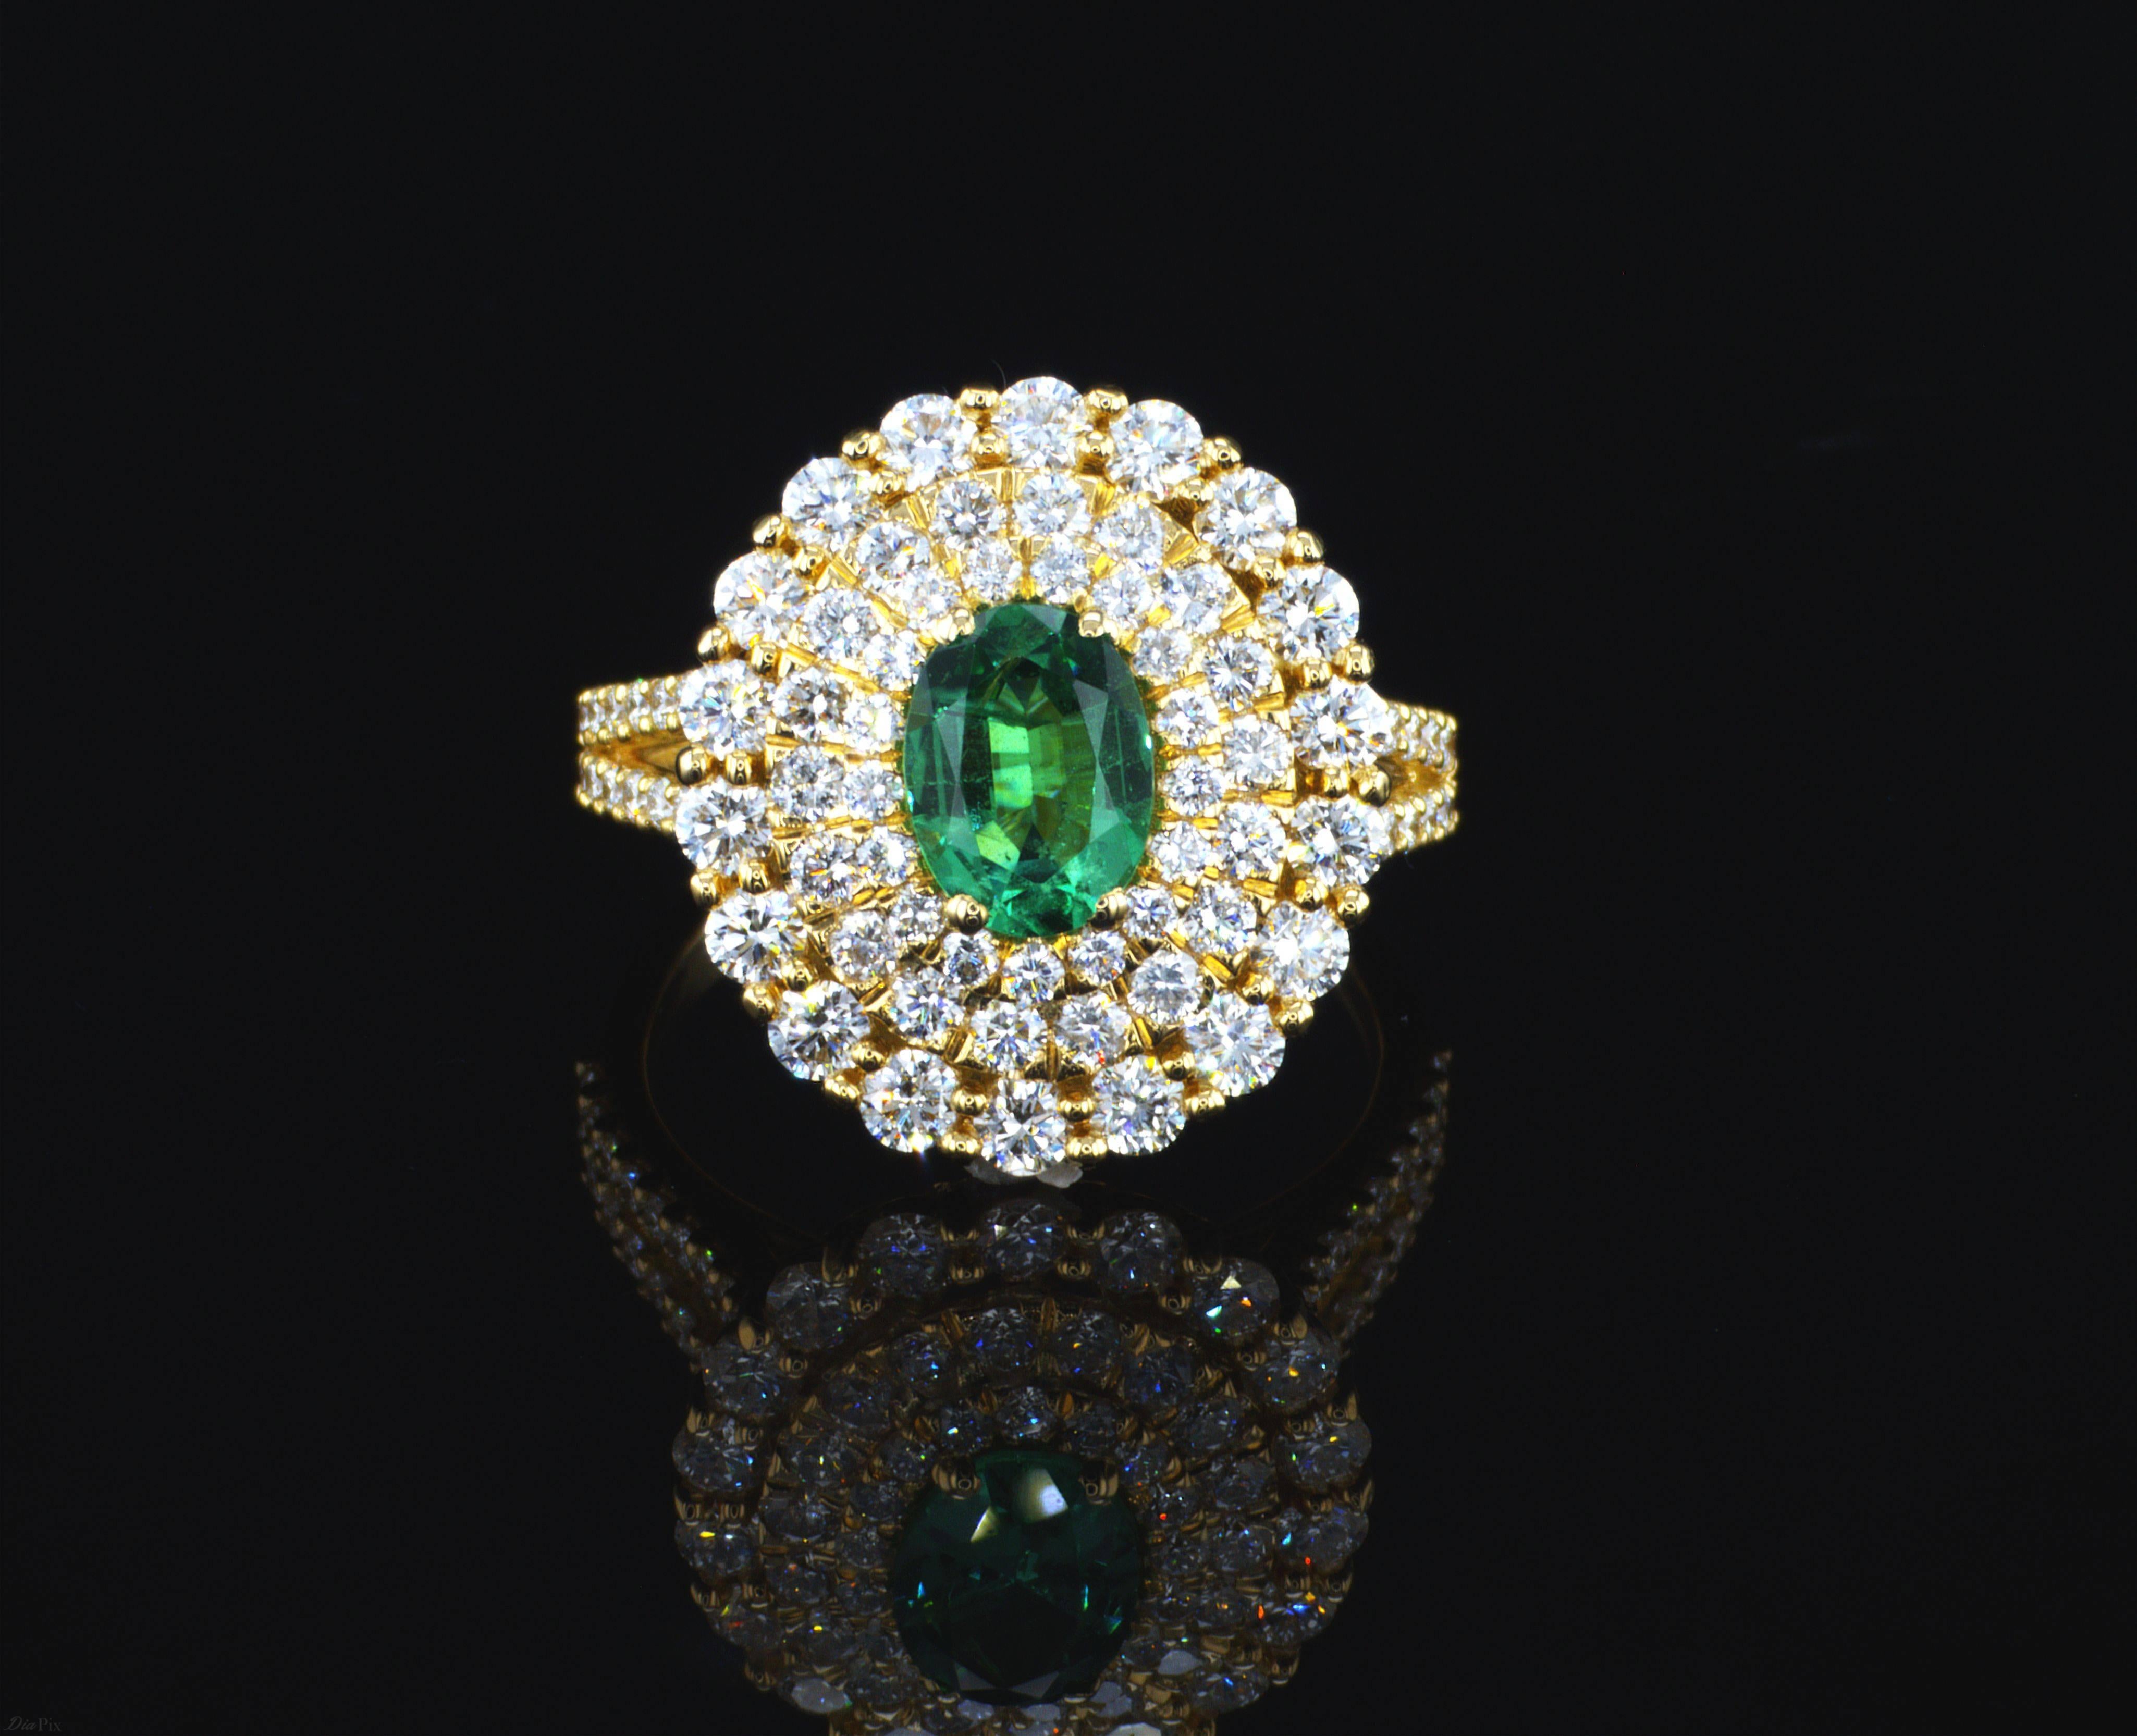 One of a kind ring starring 0.80 Carat Oval Cut Natural Emerald encircled in a triple halo white round diamonds. This Hand crafted ring is done with precise workmanship and set on 18K Yellow Gold. 
Jewel Details: 
0.80 Carat Oval Natural Emerald
90